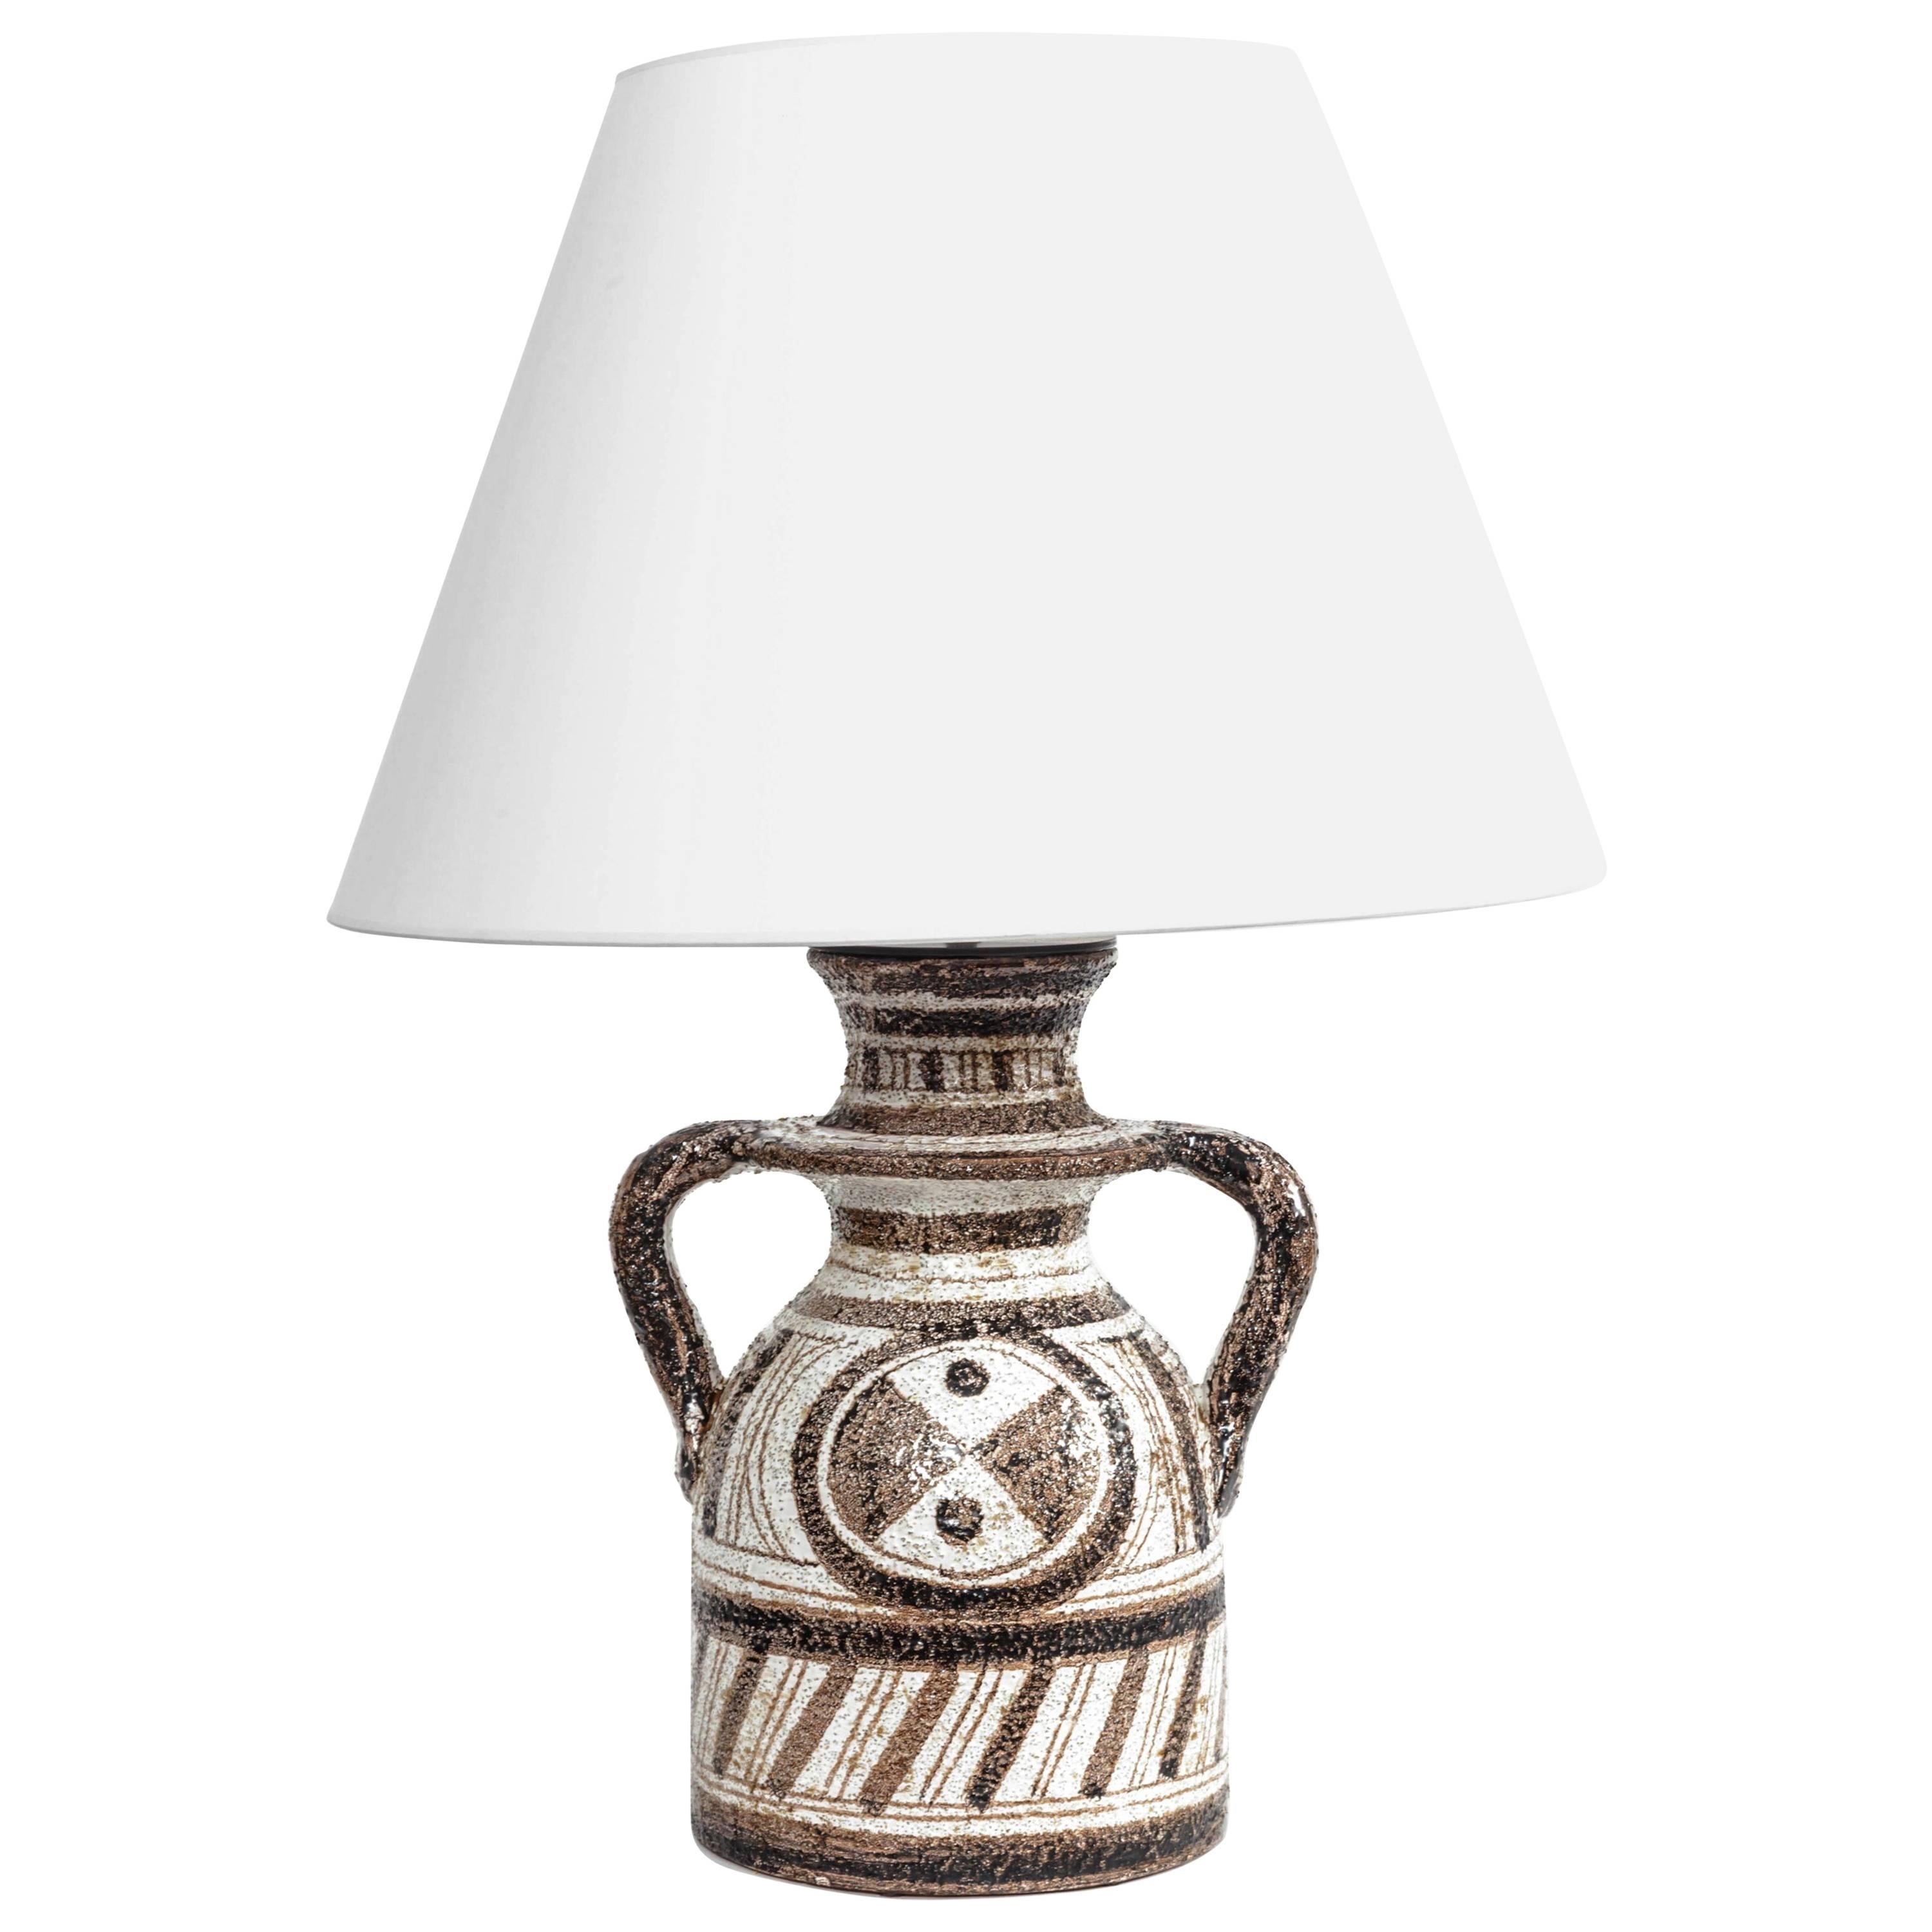 Rosenthal Netter Graphic Textured Table Lamp